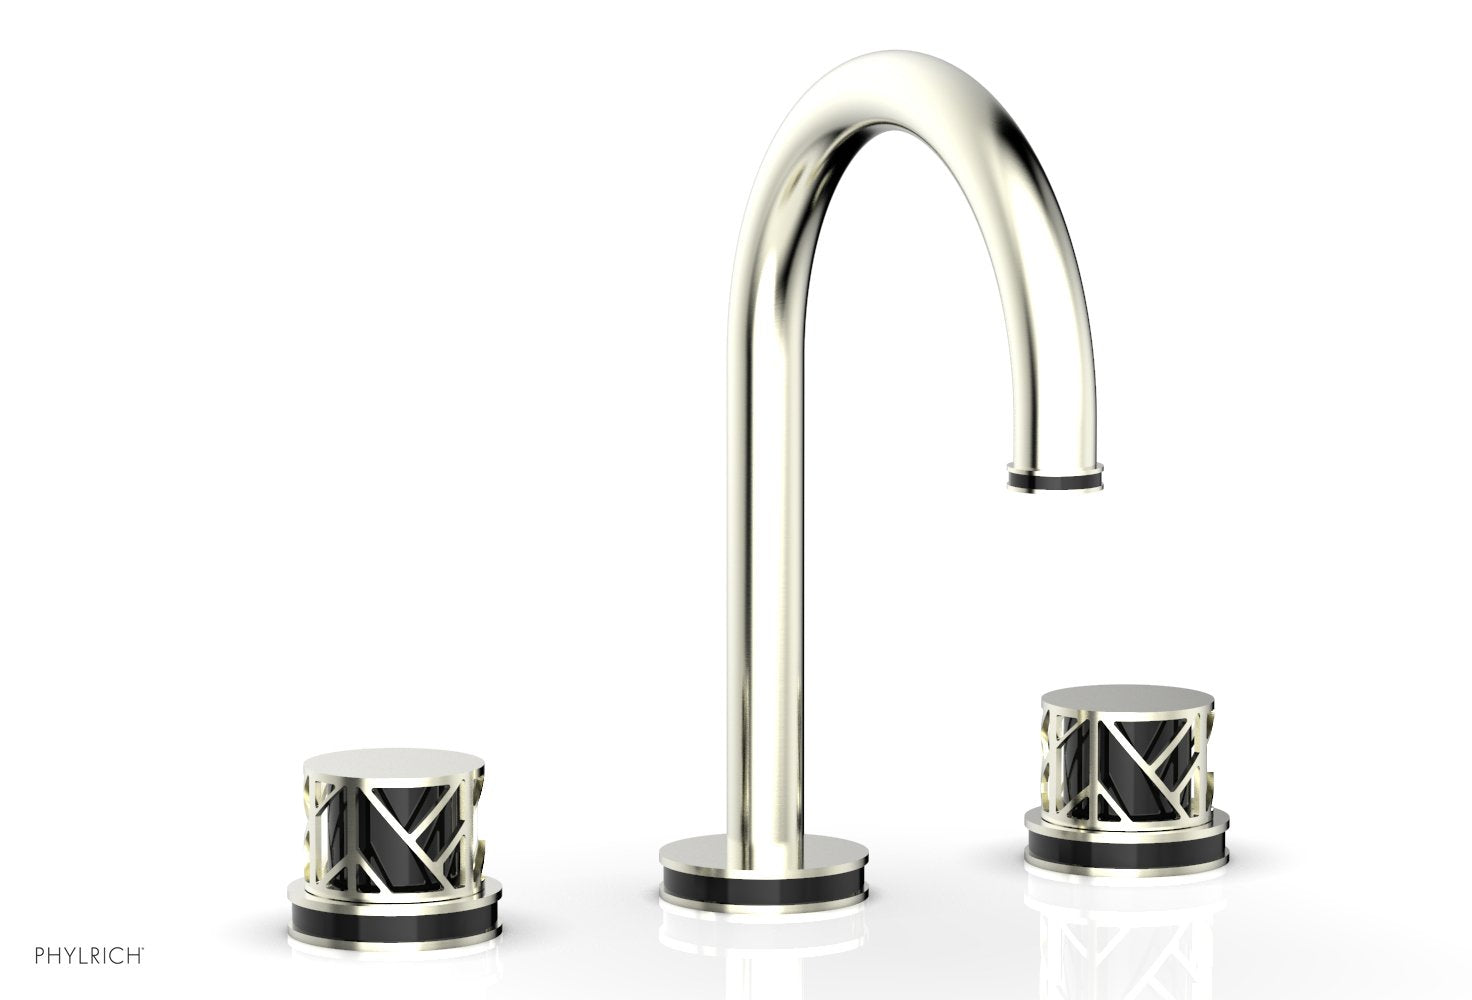 Phylrich JOLIE Widespread Faucet - Round Handles with "Black" Accents